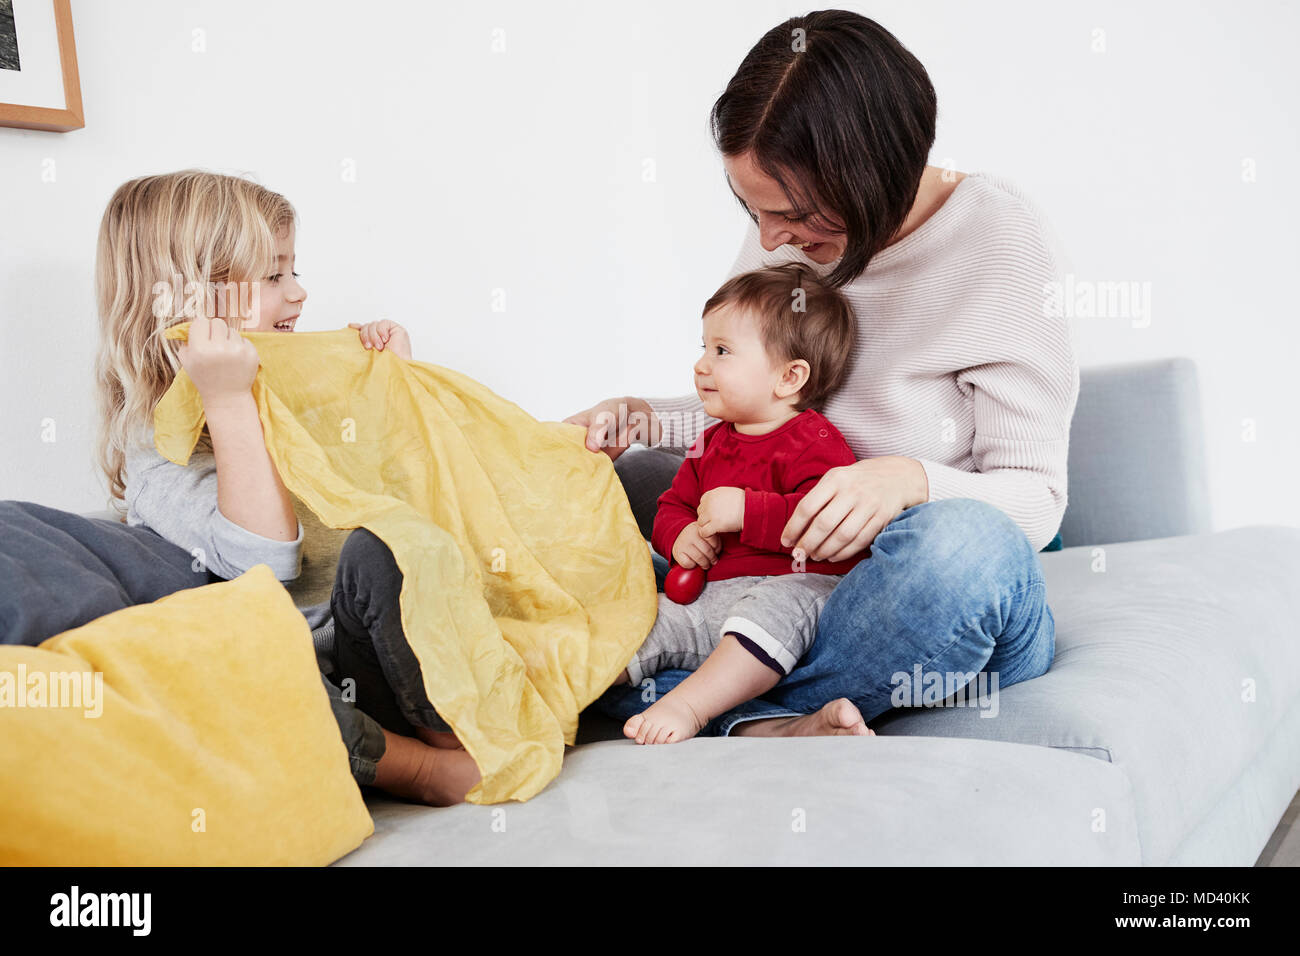 Family sitting on sofa, young girl playing peek-a-boo with baby sister Stock Photo